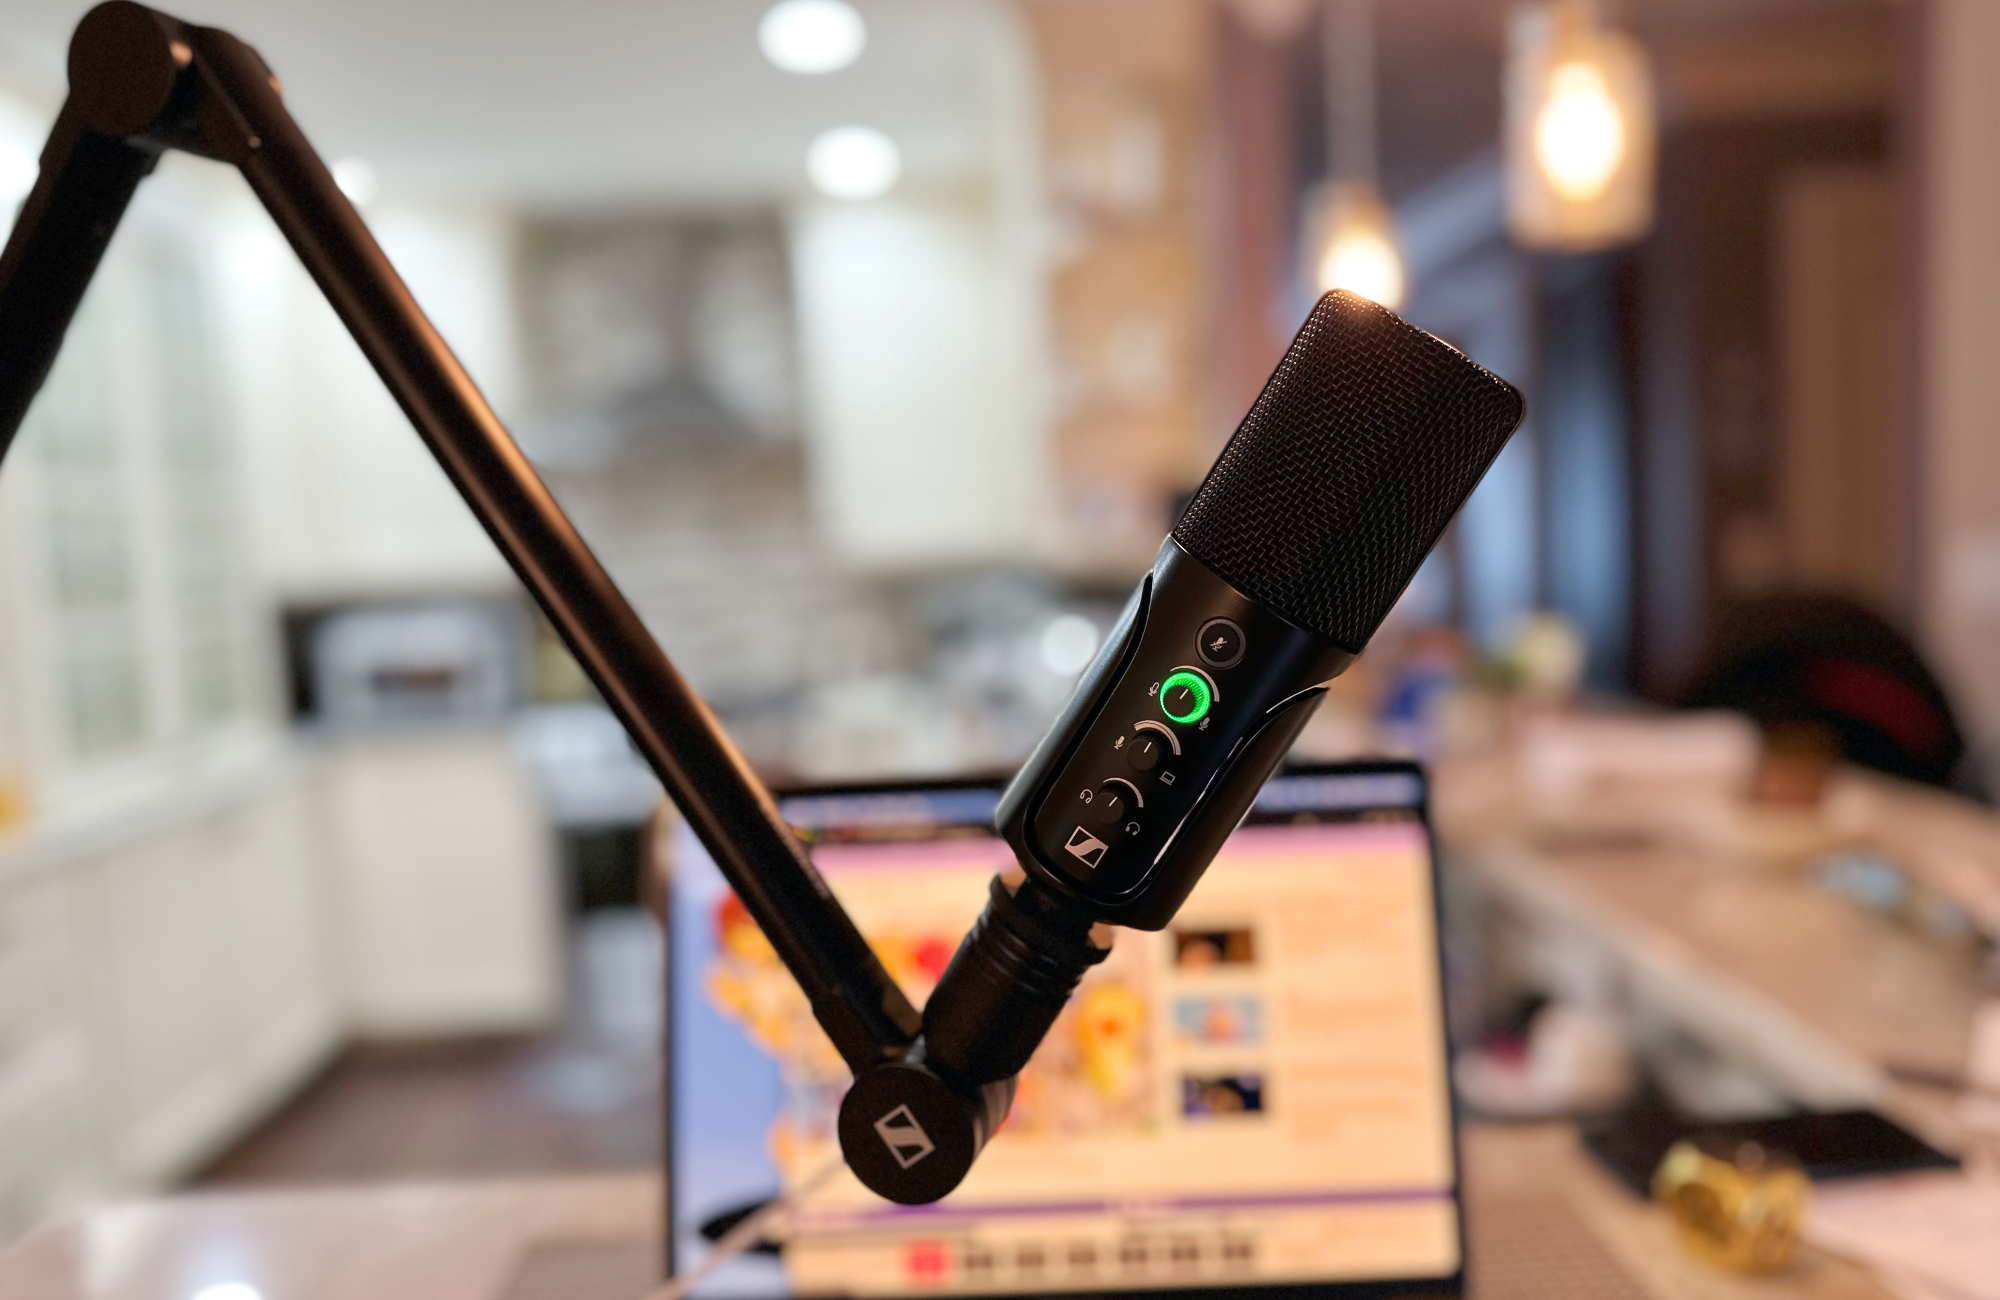 Razer Seiren X USB Condenser Microphone Review - Convenience Comes With A  Price –